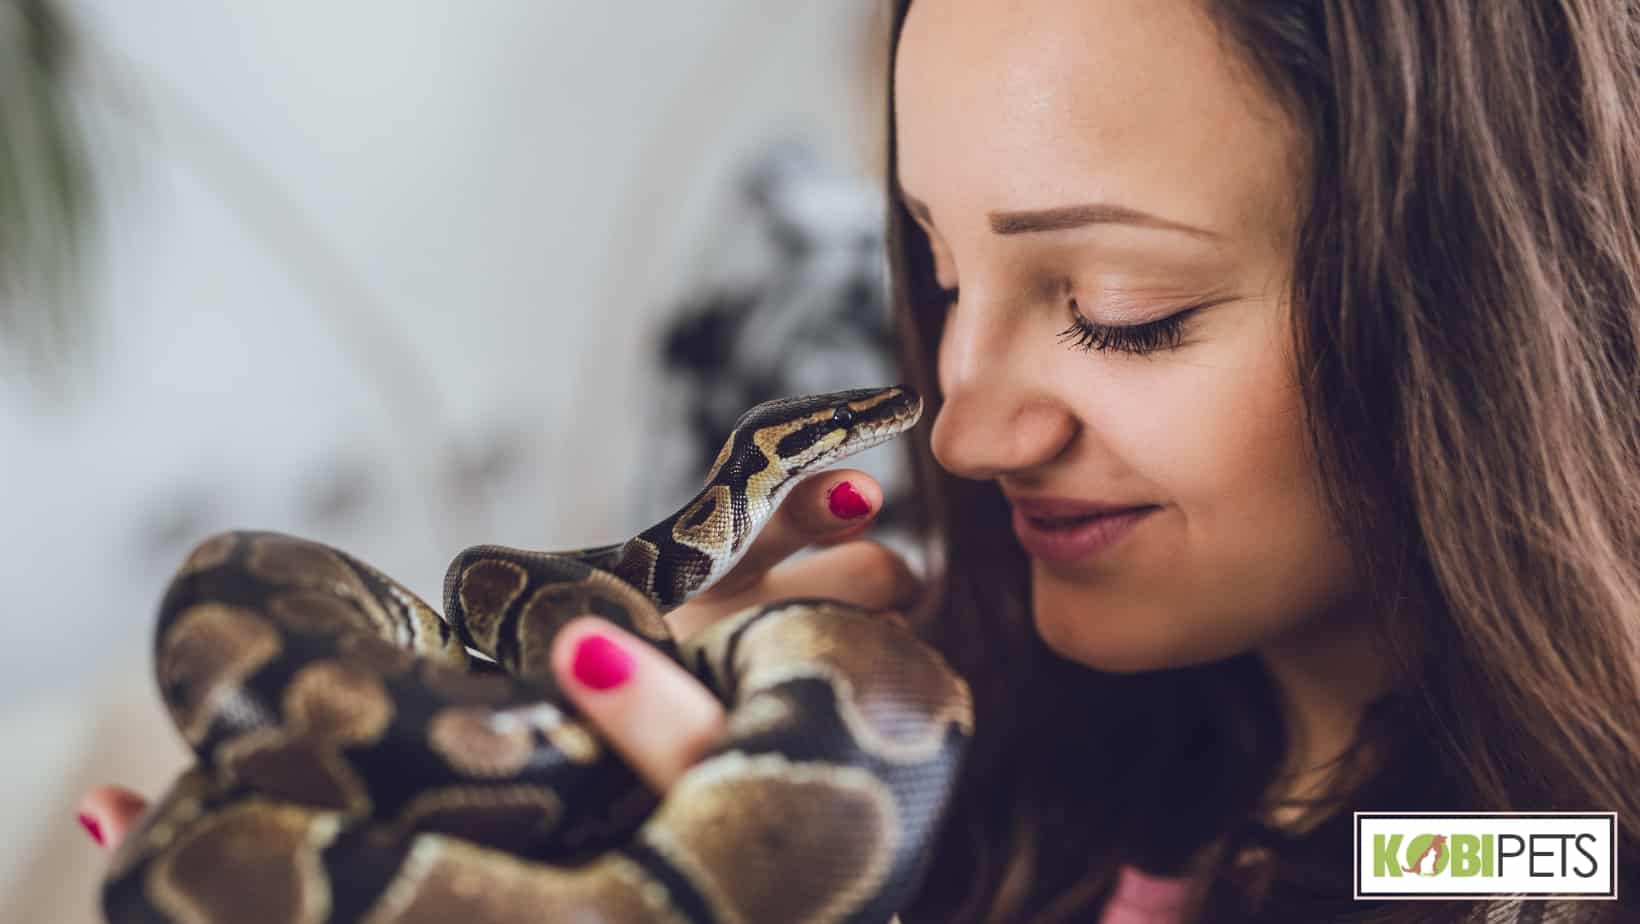 owning an exotic pet